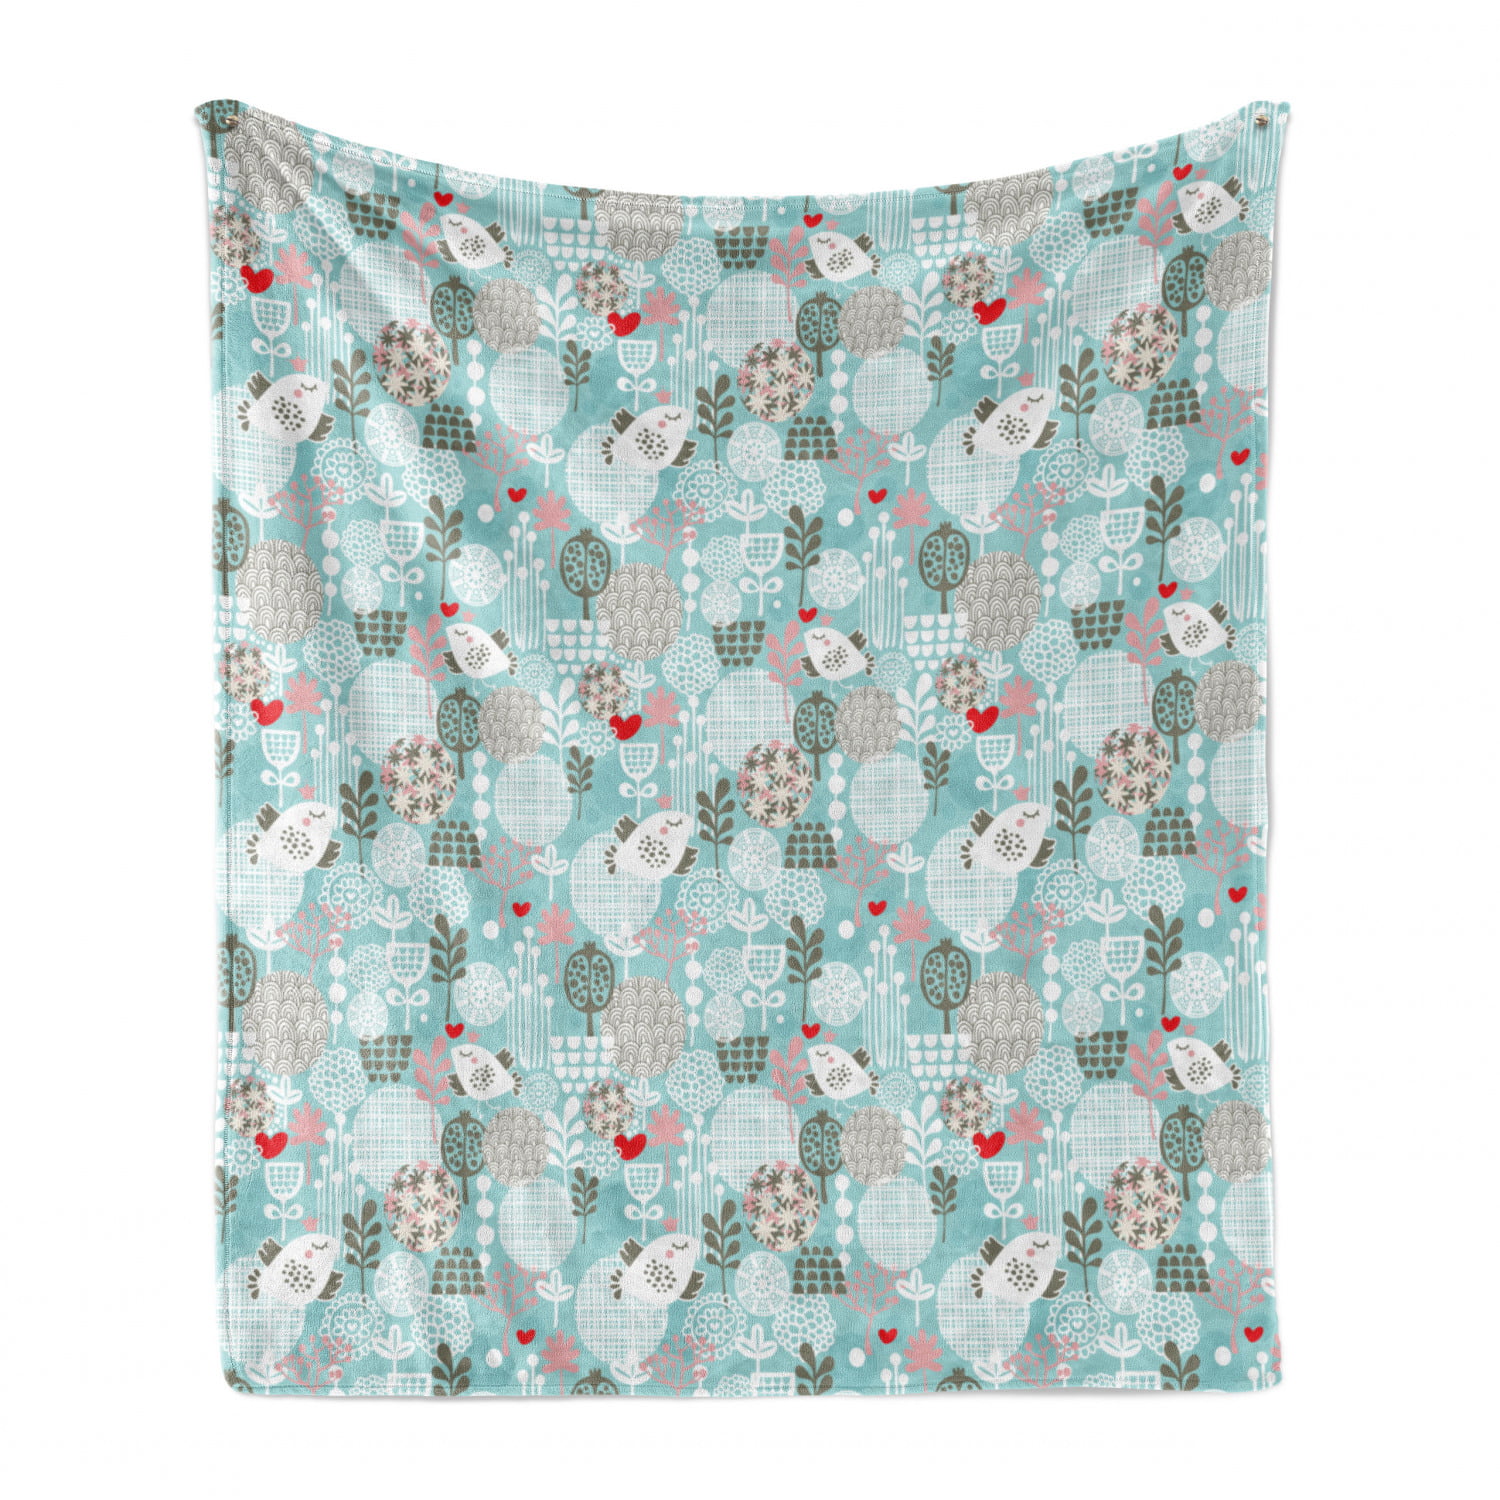 Cozy Plush for Indoor and Outdoor Use Teal White Red Ambesonne Floral Soft Flannel Fleece Throw Blanket Pattern with Birds Hearts Trees and Flowers Summertime Garden Joyful Fun Cartoon 50 x 60 